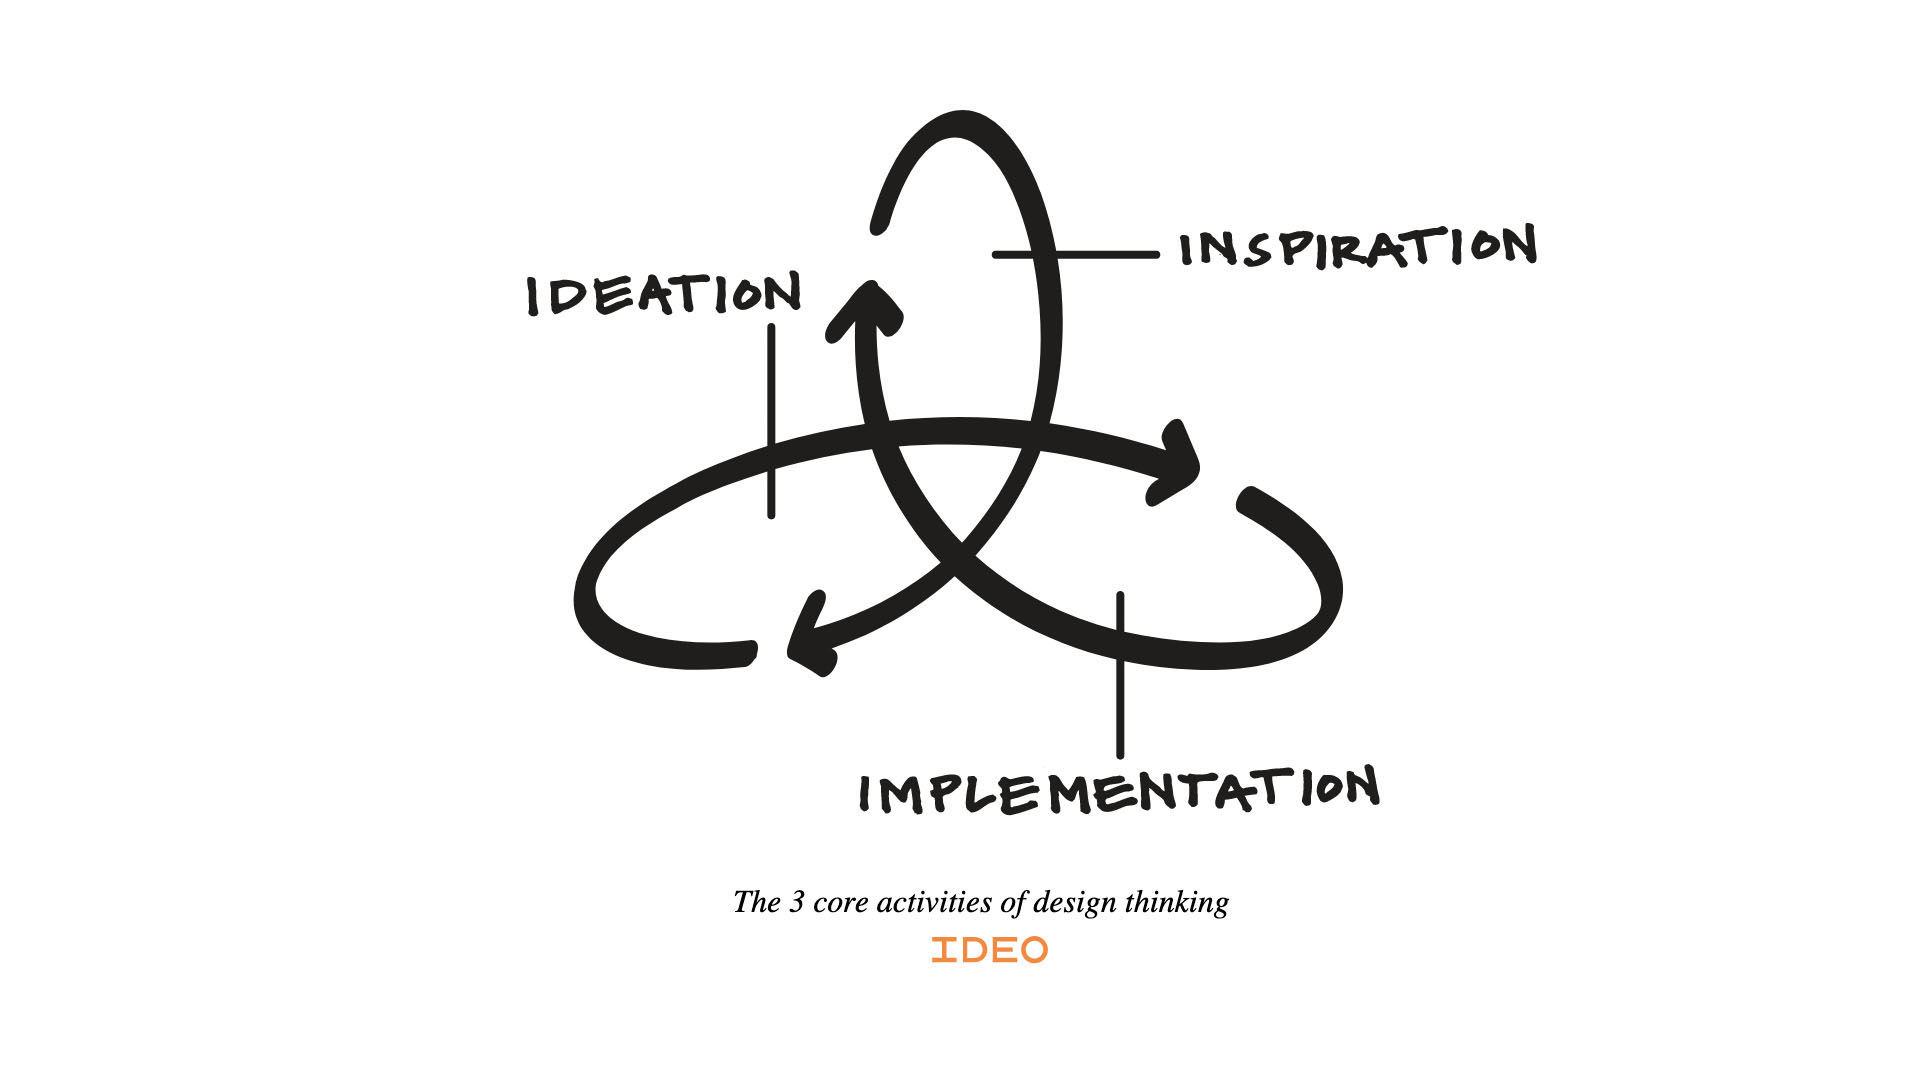 Illustration of IDEO's three core activities of design thinking. These are Inspiration, Ideation, and Implementation. These concepts are shown in a three way möbius loop.